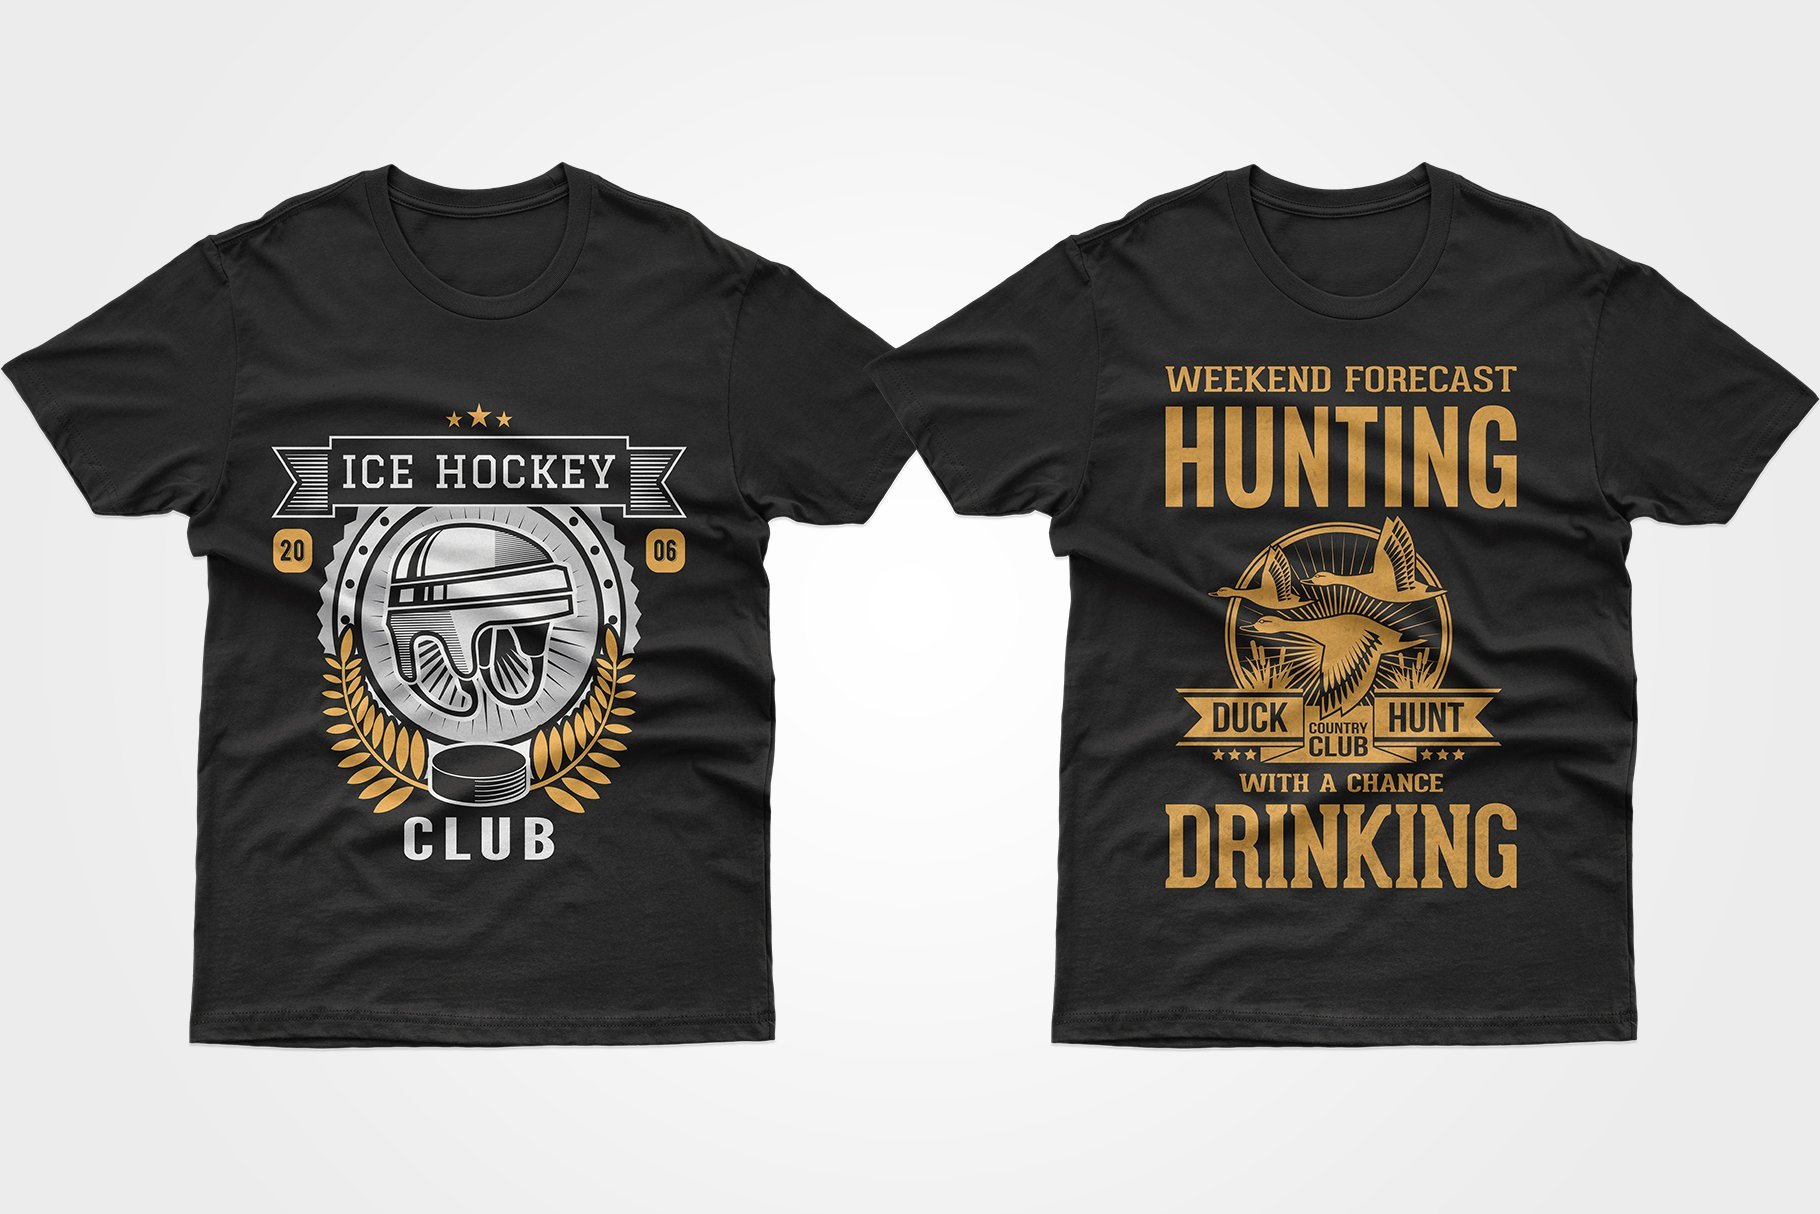 Two black T-shirts - one with a hockey helmet, the other - a poster about a duck hunt.